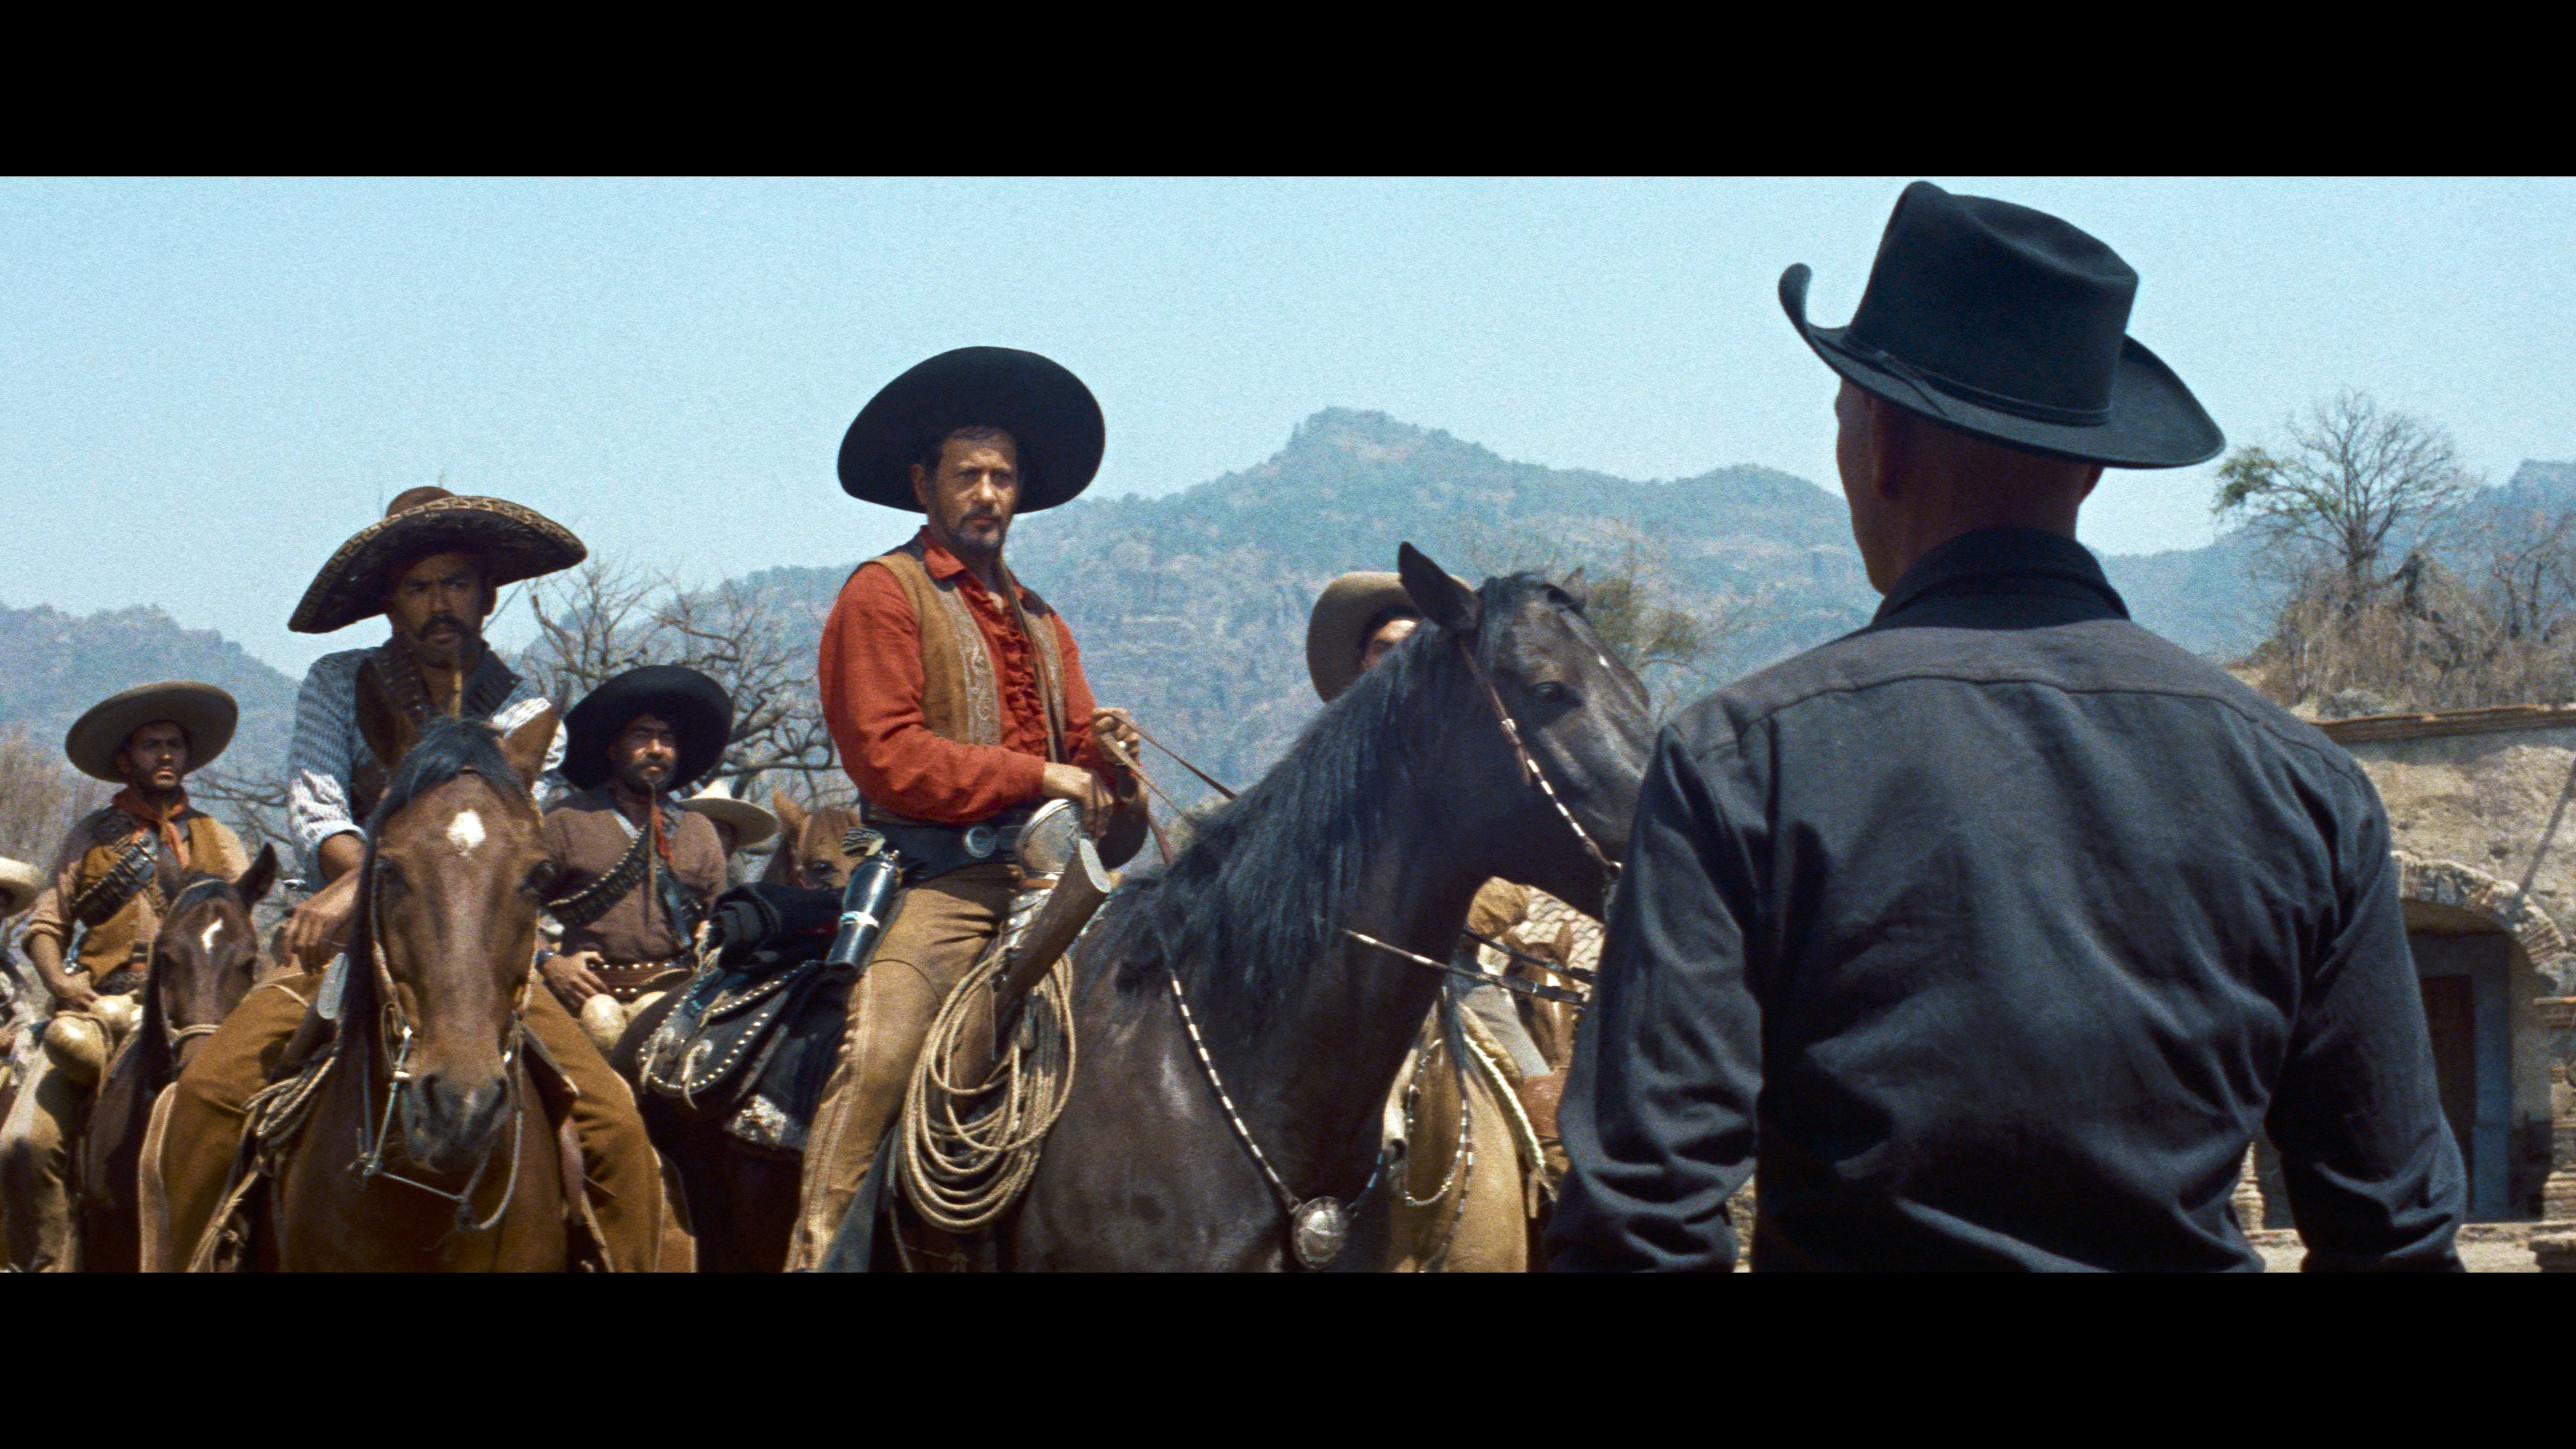 The Magnificent Seven (1960) - 4K Ultra HD Blu-ray Ultra HD Review